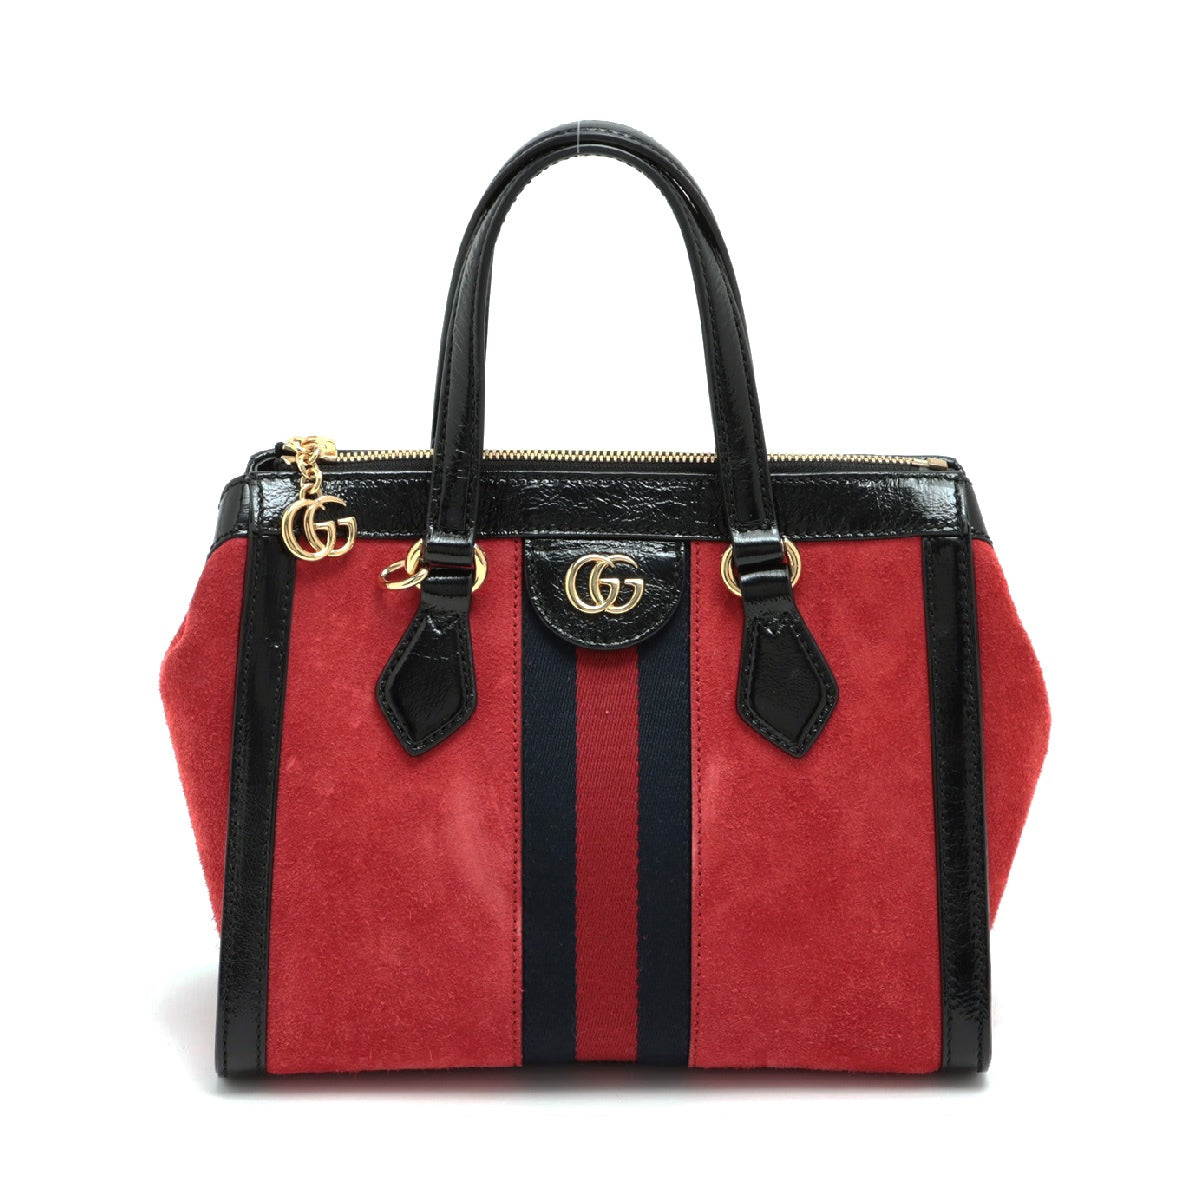 Gucci Ophidia Suede x patent 2way handbag Red 547551